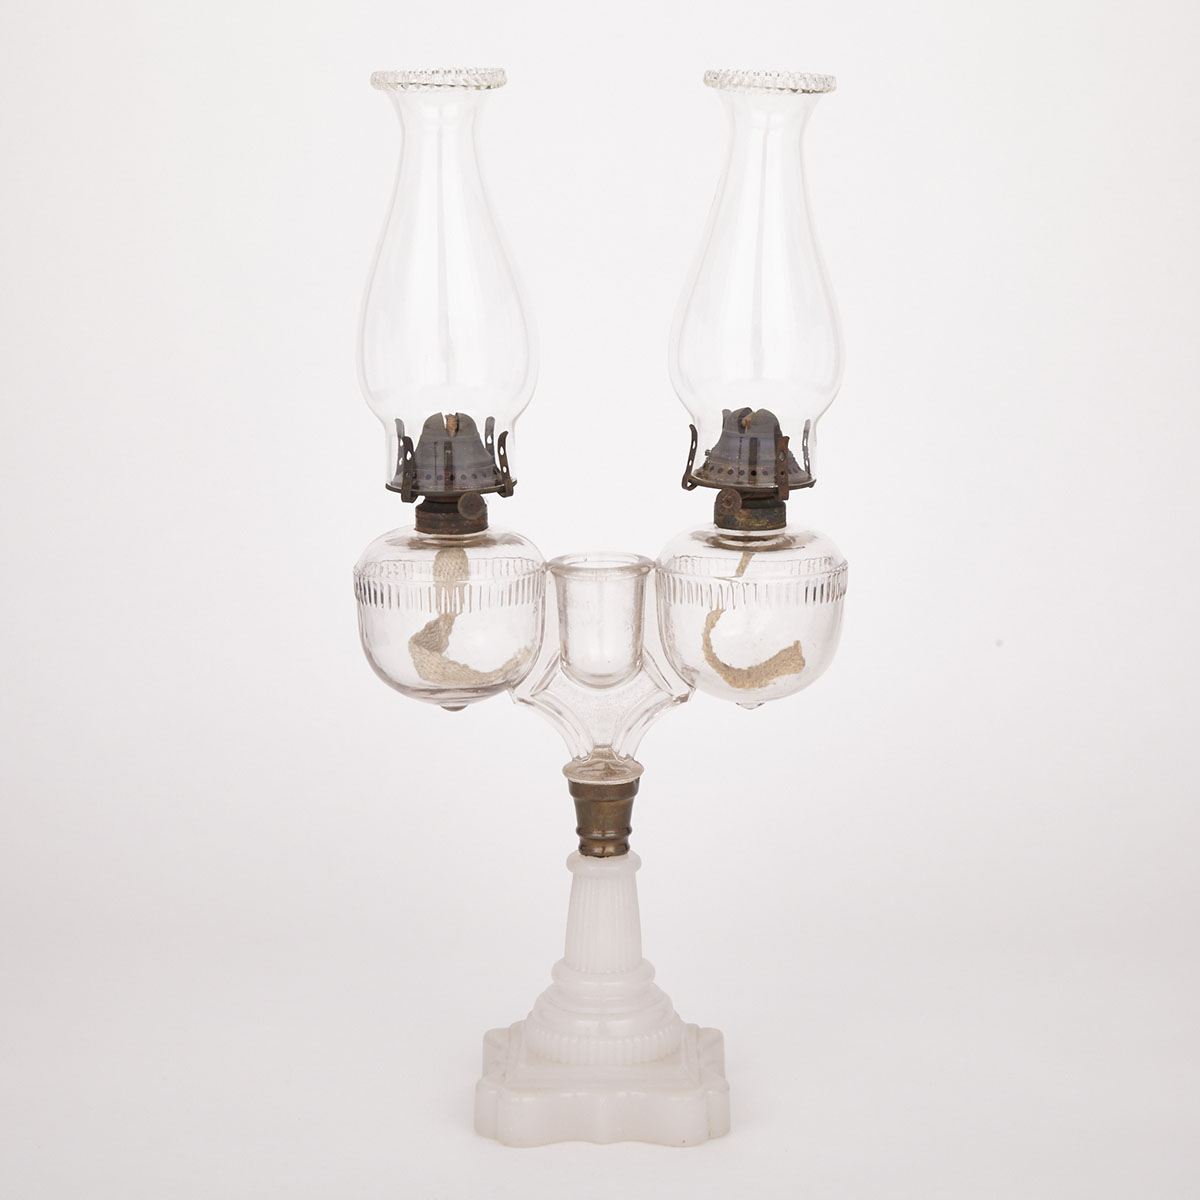 Ripley and Company Clambroth and Clear Glass Wedding Lamp, c.1870